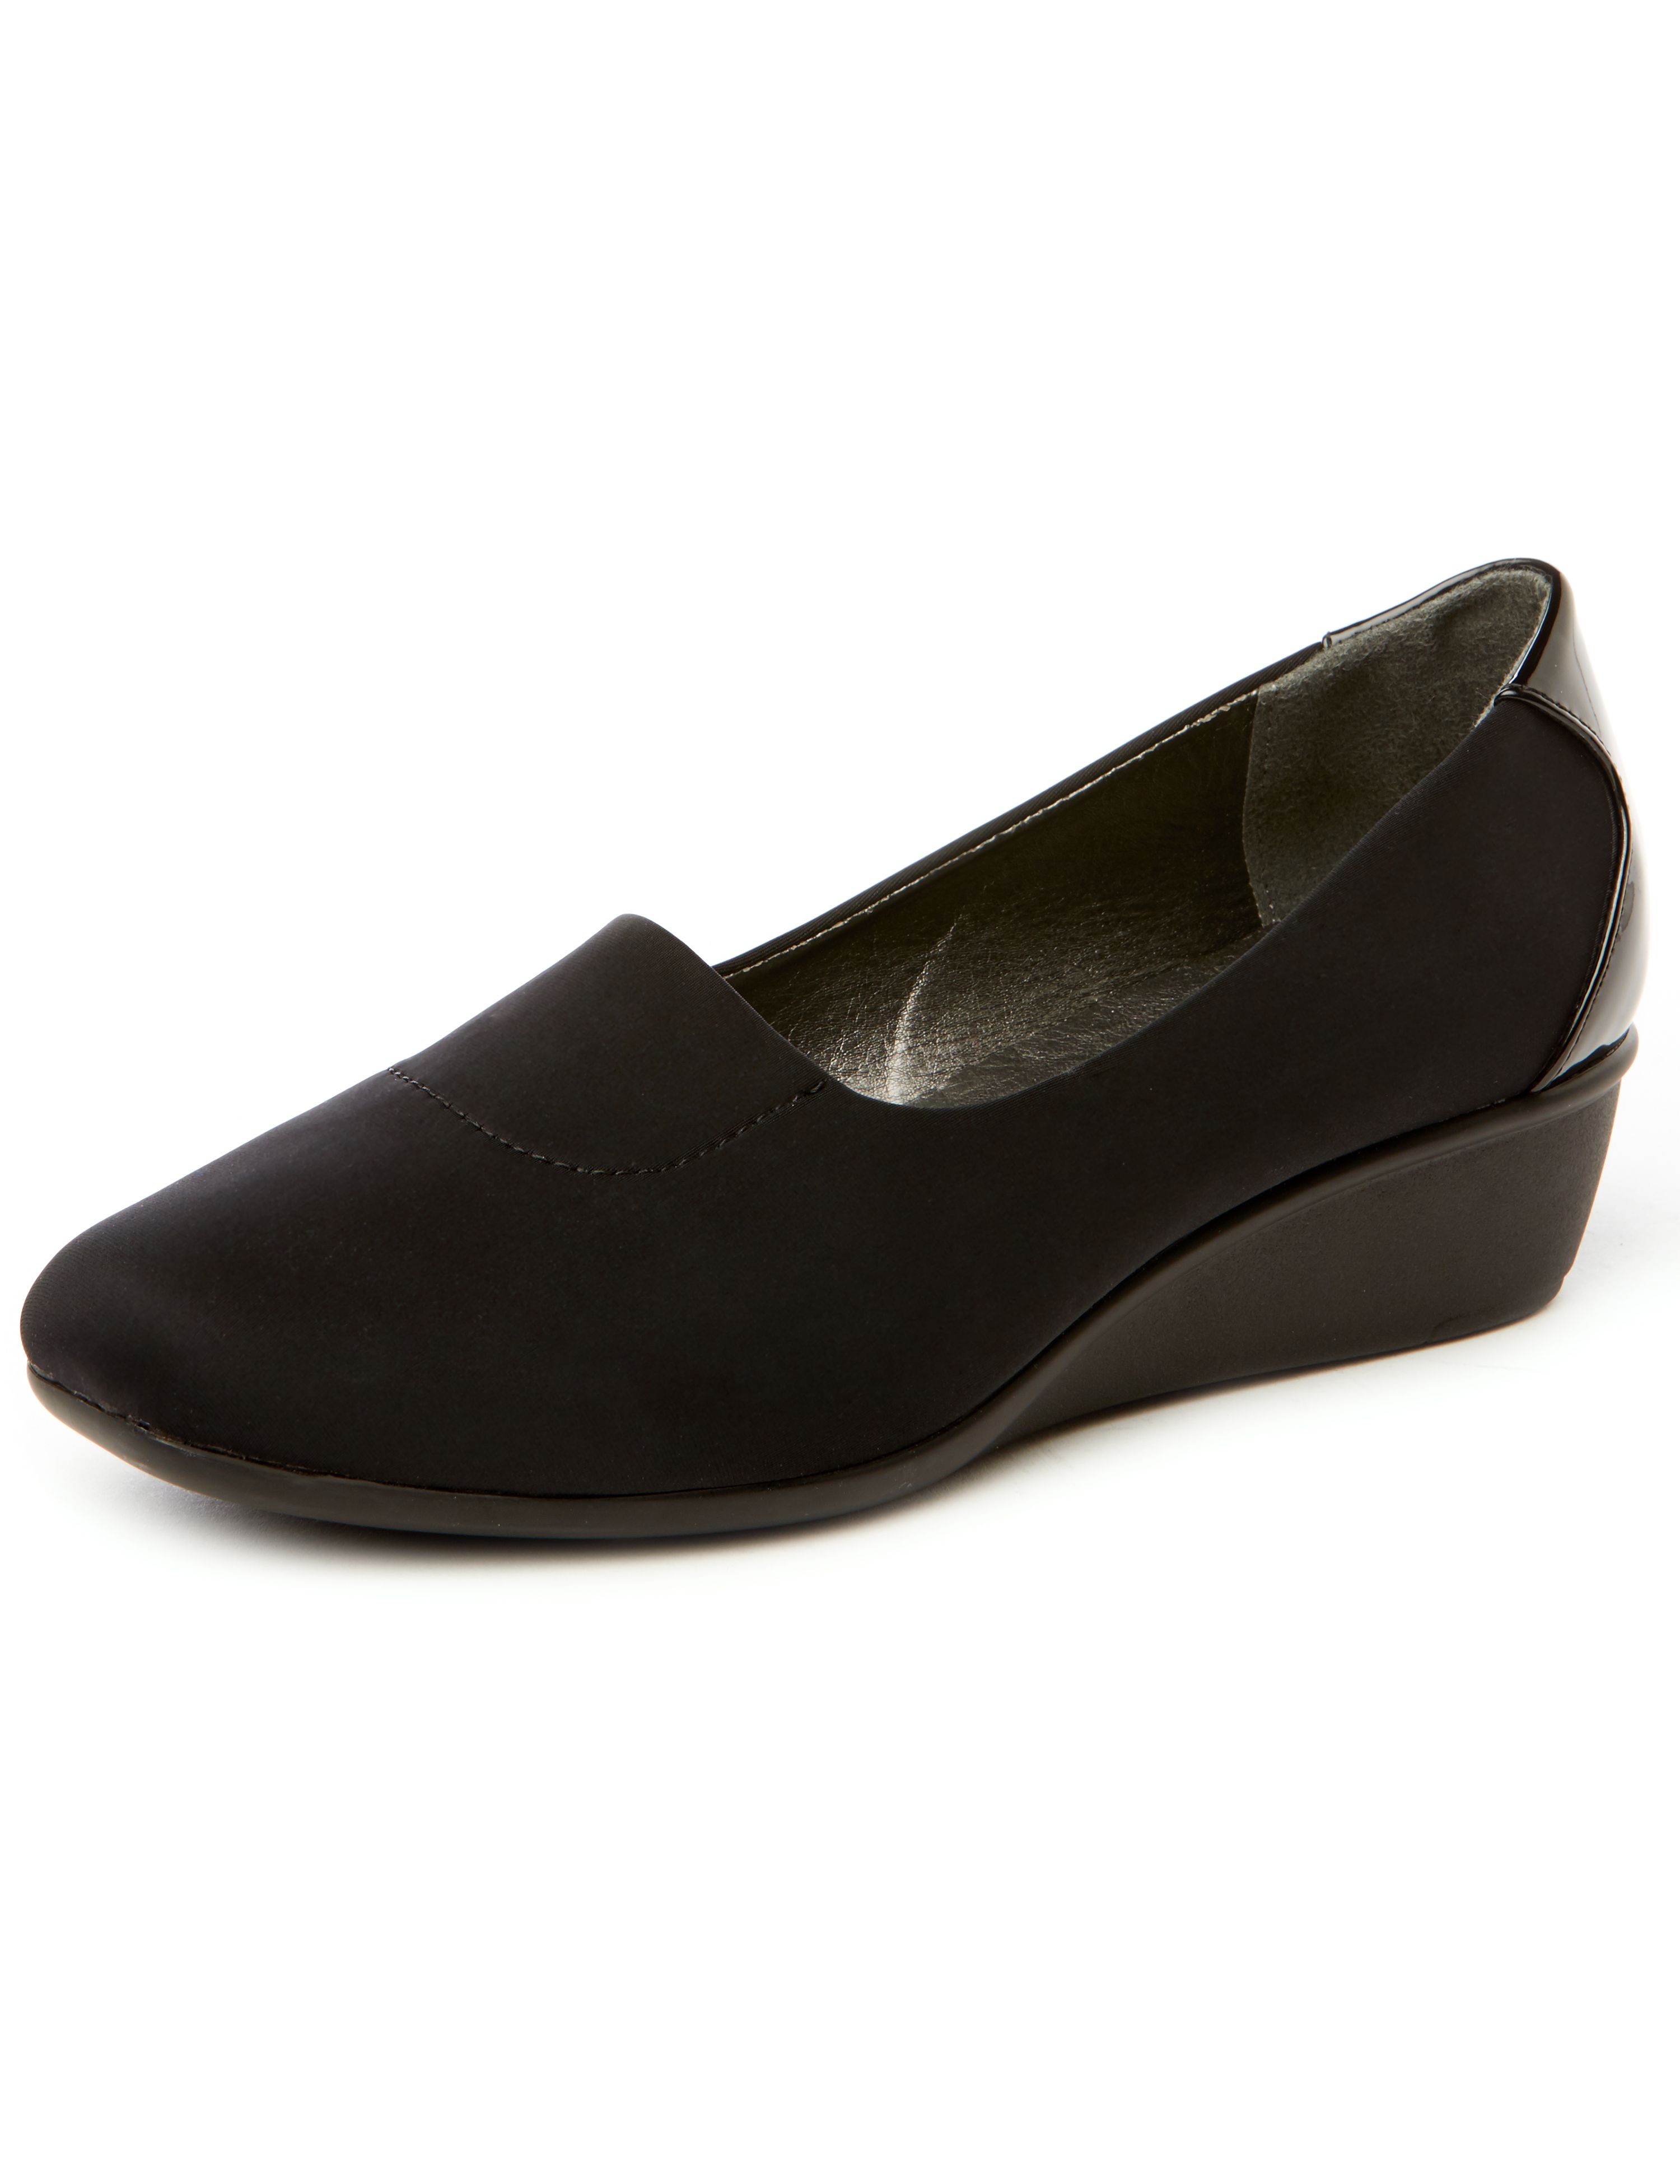 Women's Wide-Width Shoes: Flats, Wedges & More | Catherines